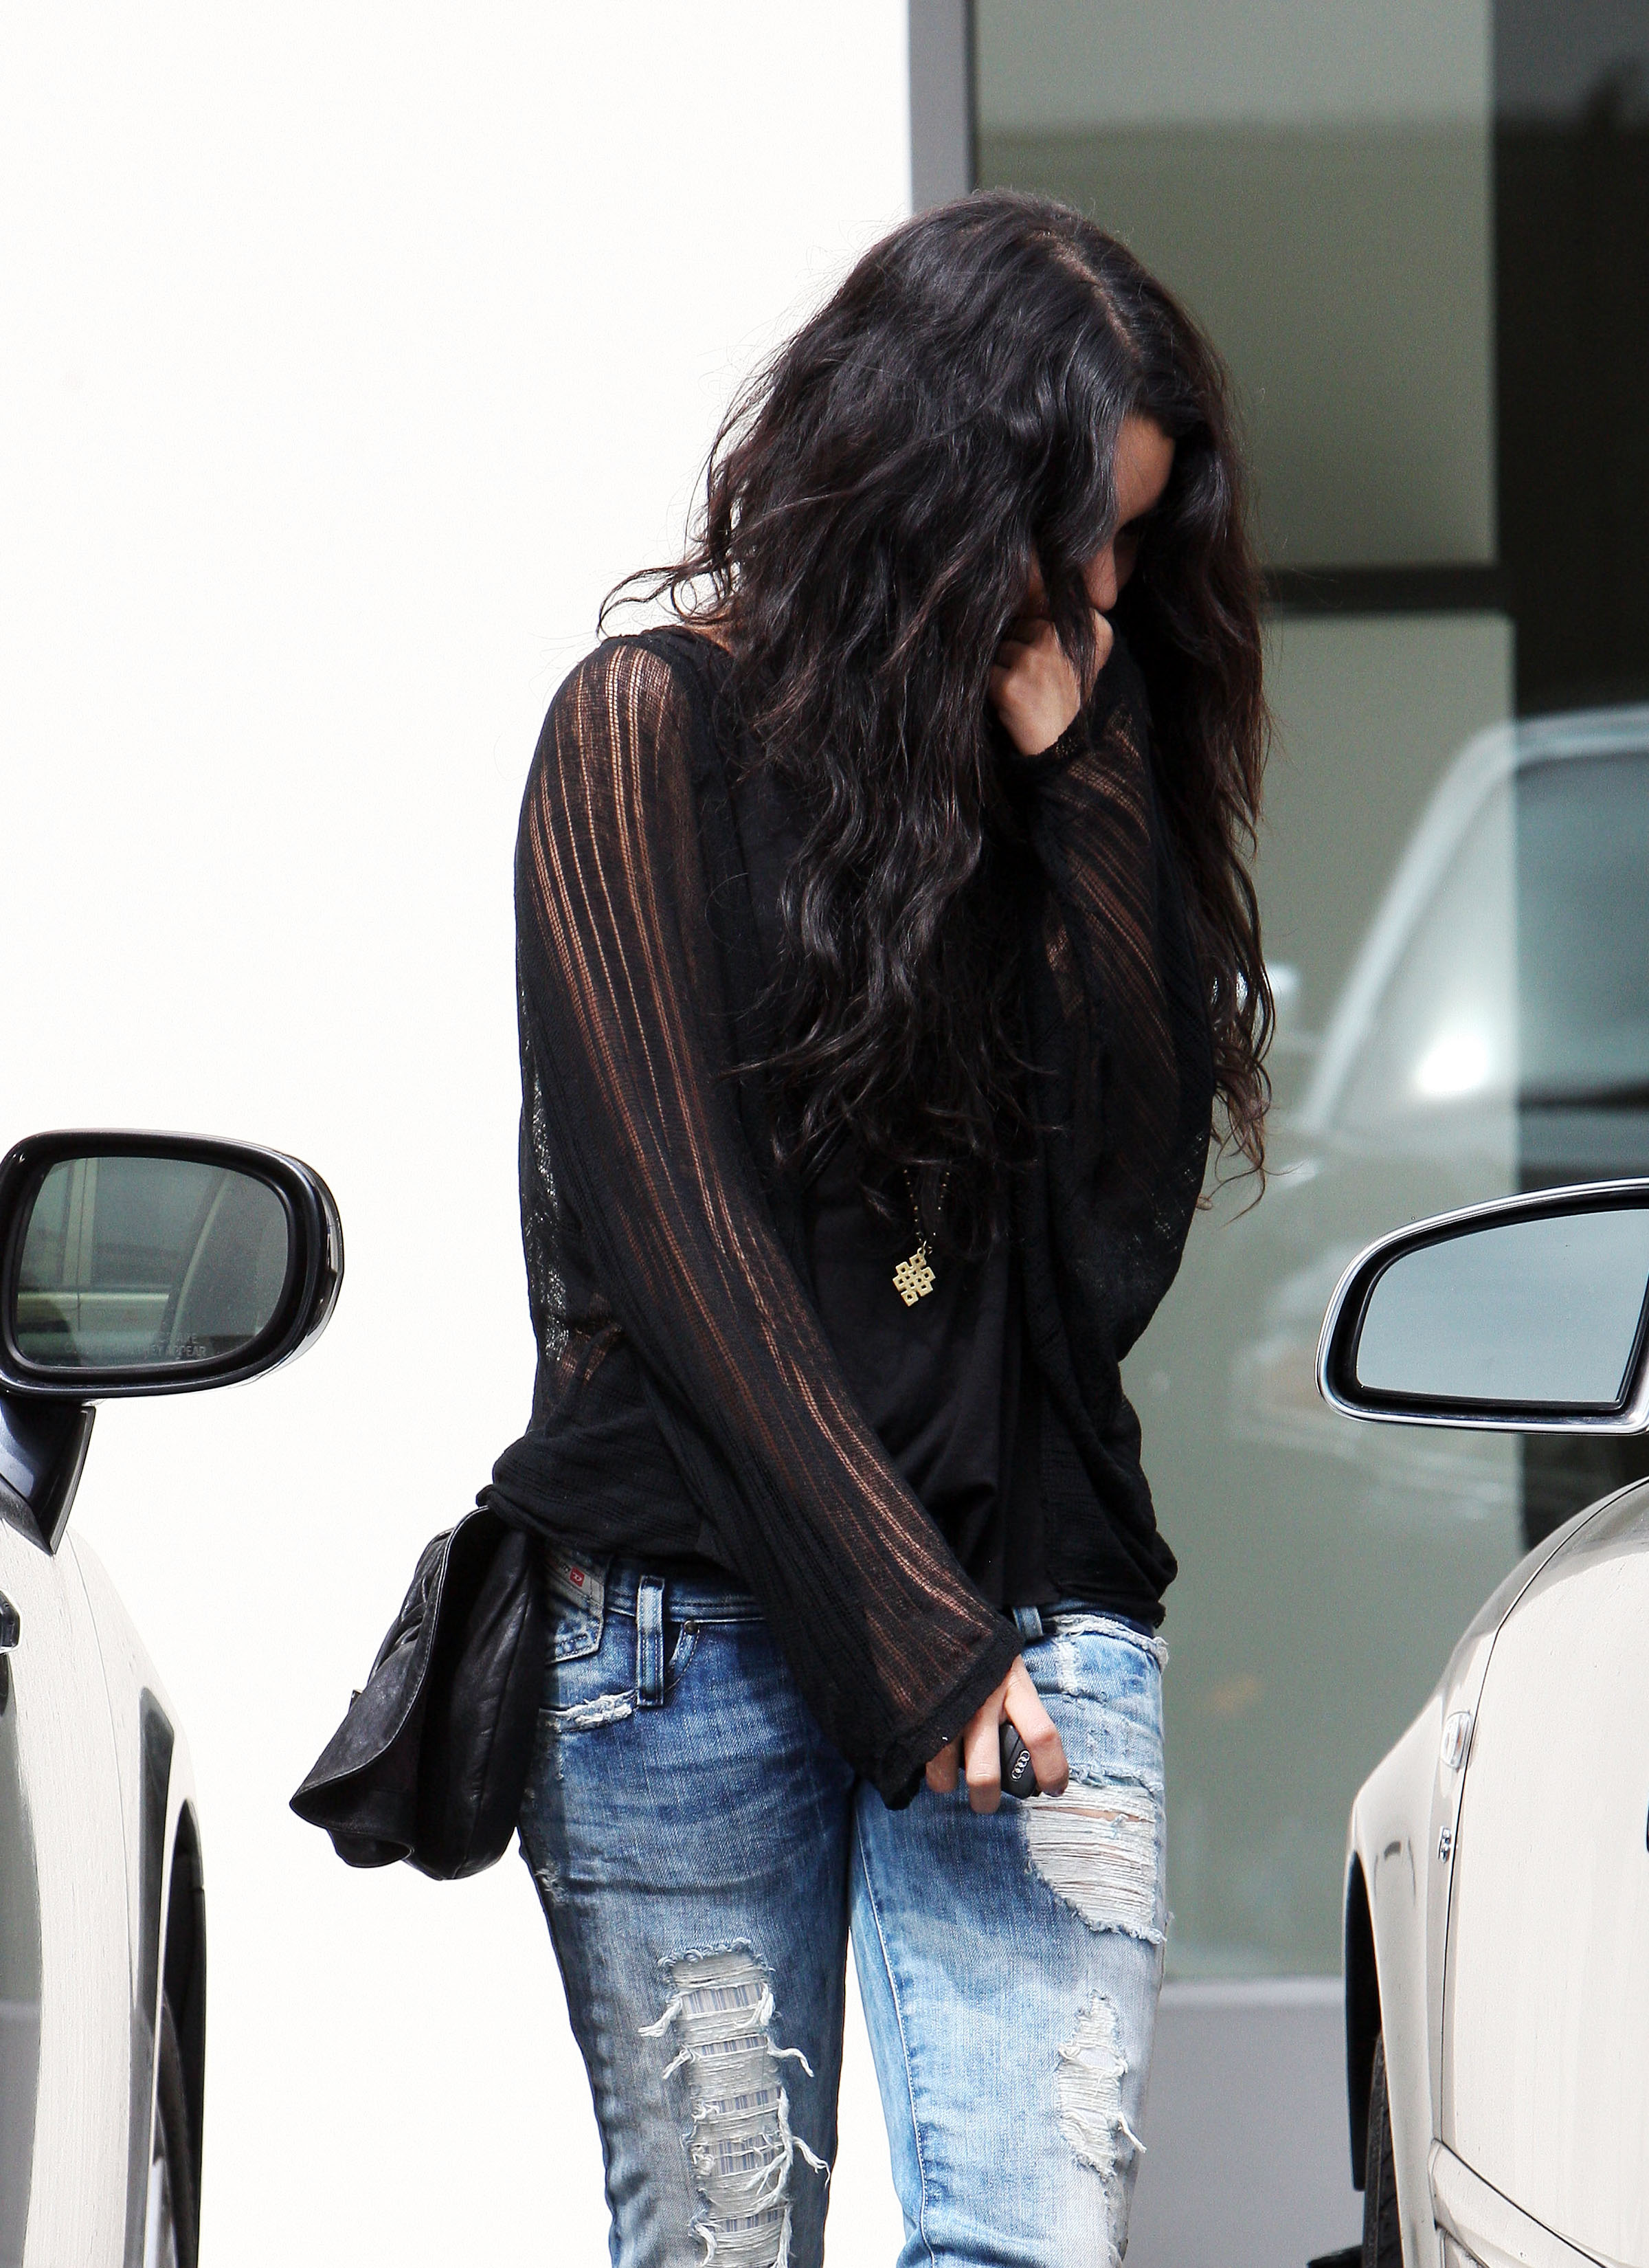 Vanessa-Leaving an office building in Beverly Hills 27-05-10 001